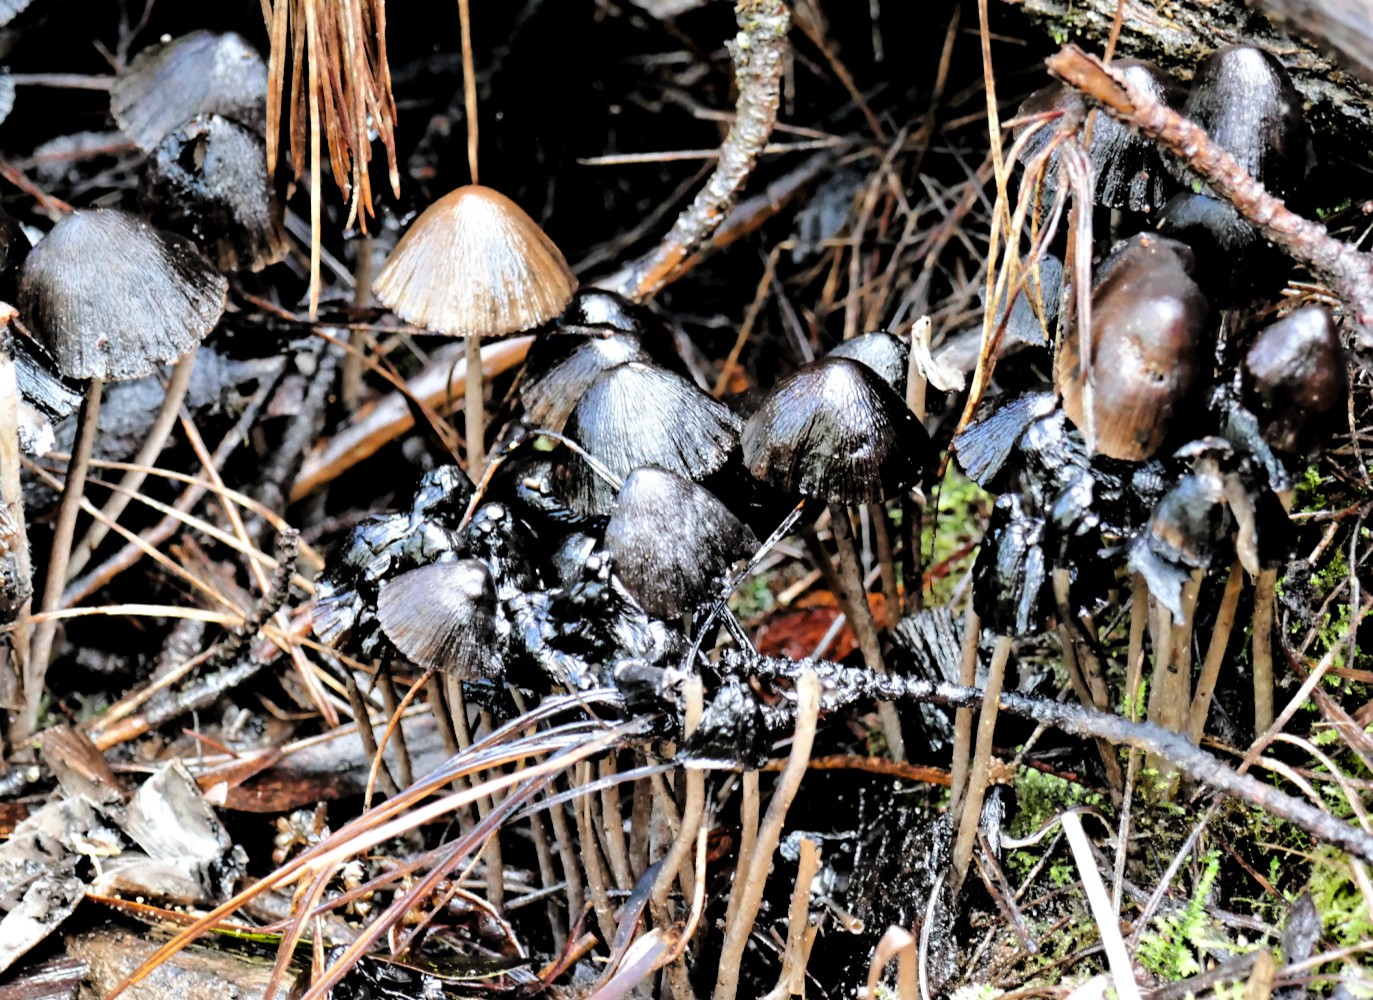 Fungi in a decomposed state